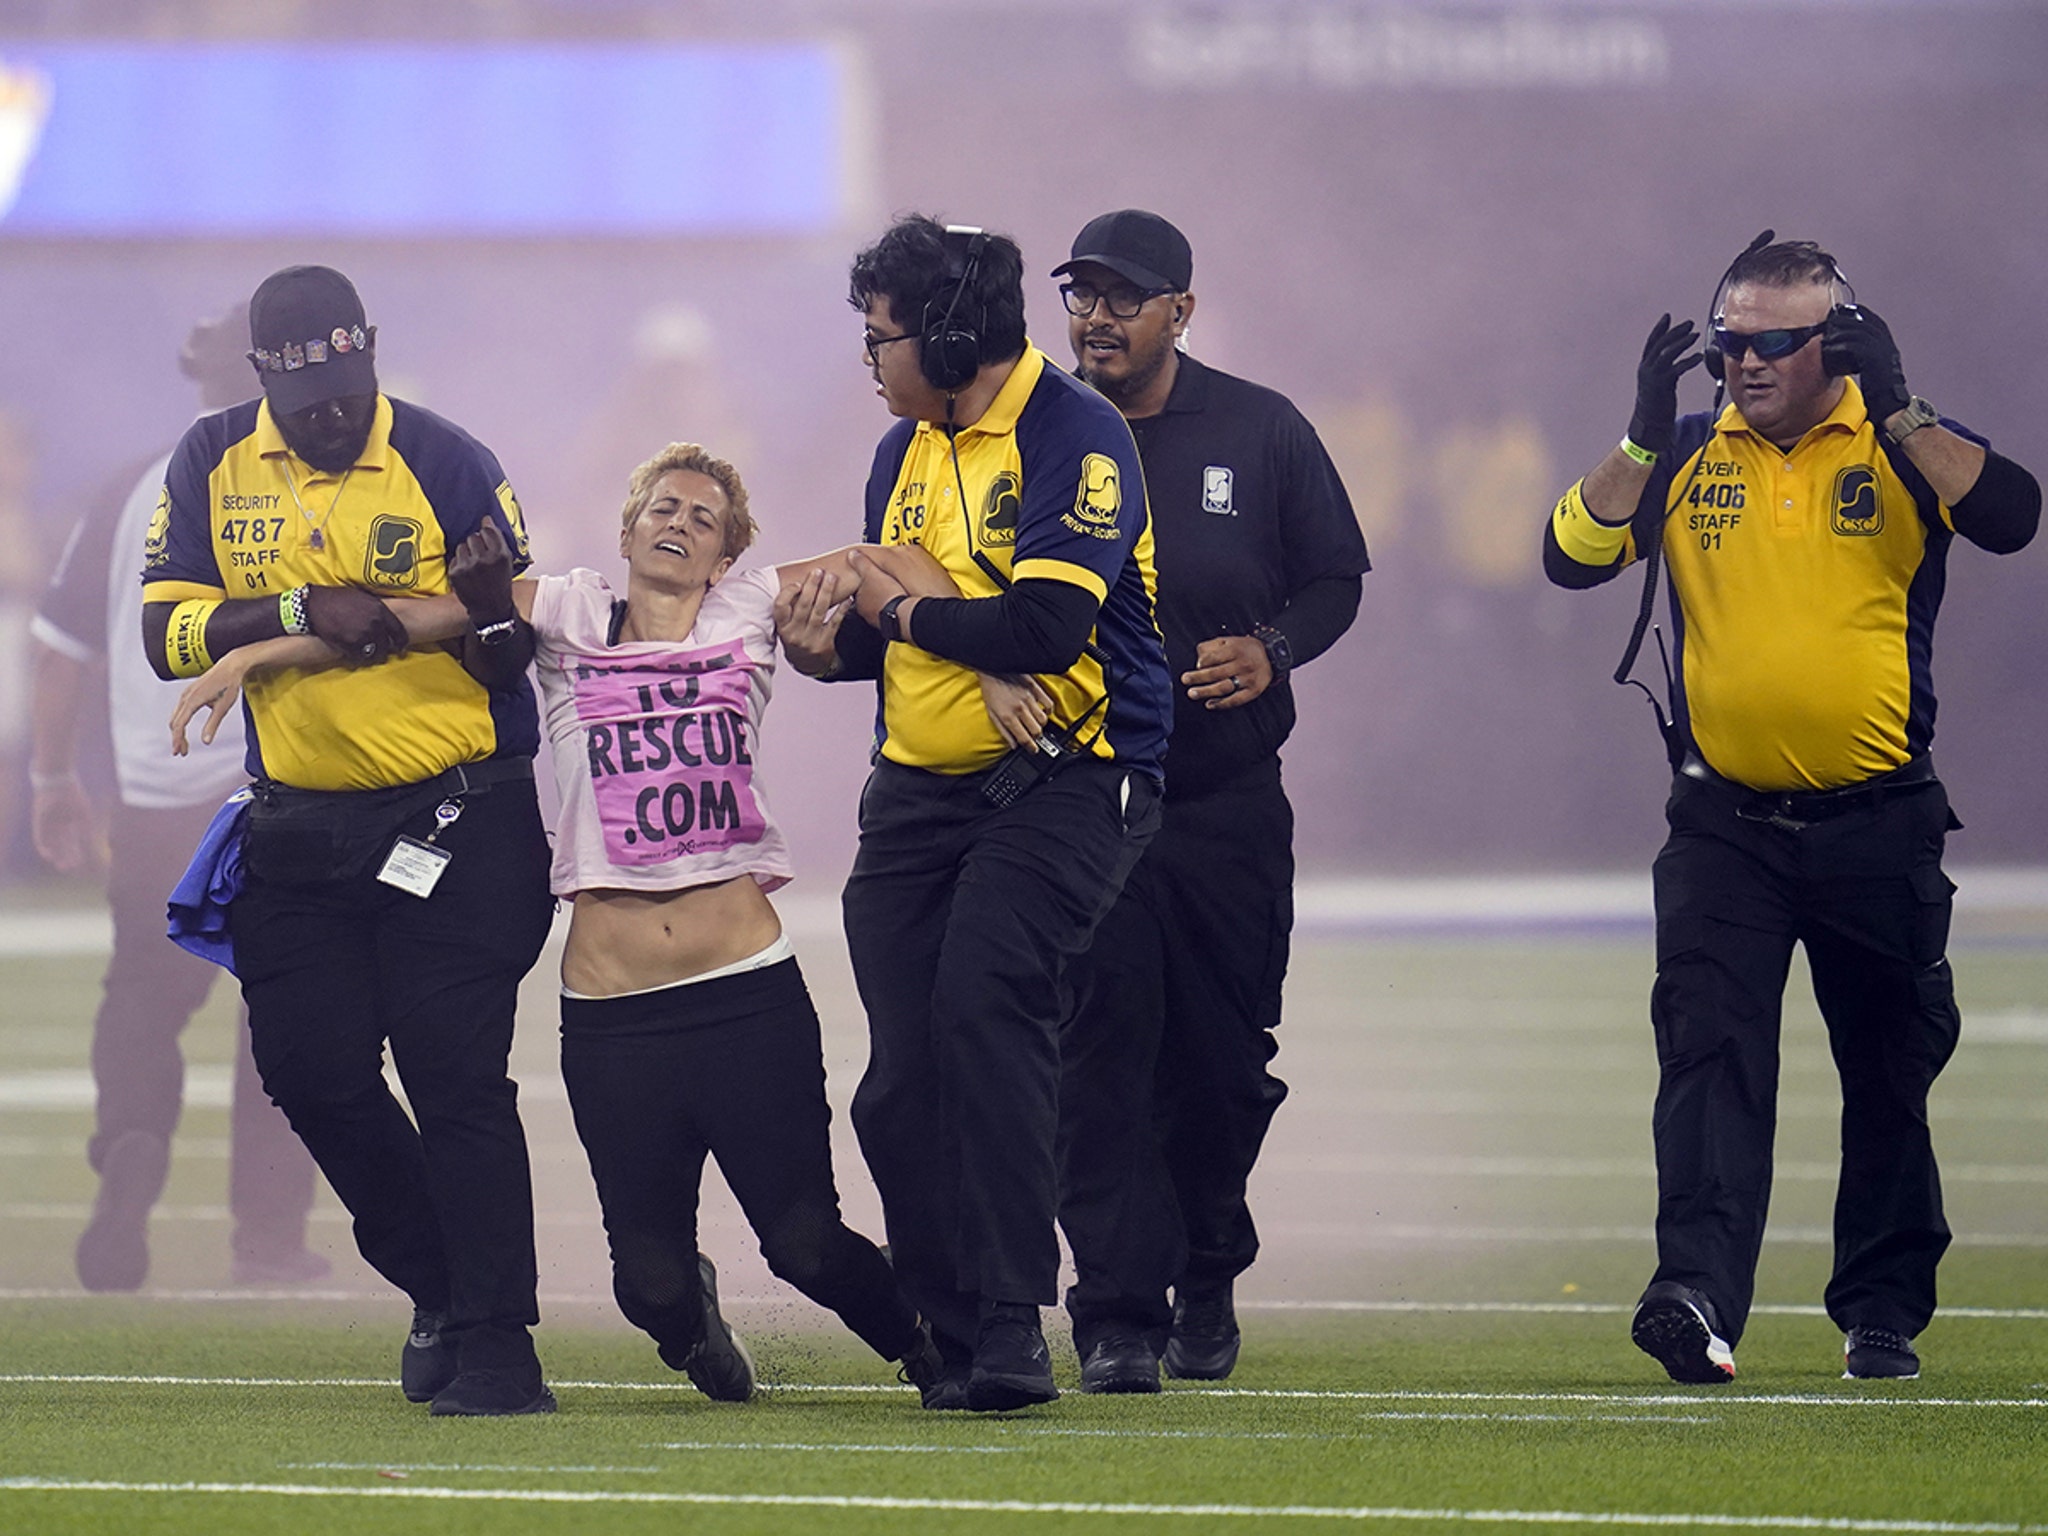 Protester Dragged Off Field For Interrupting Rams-Bills Game With Pink Flare